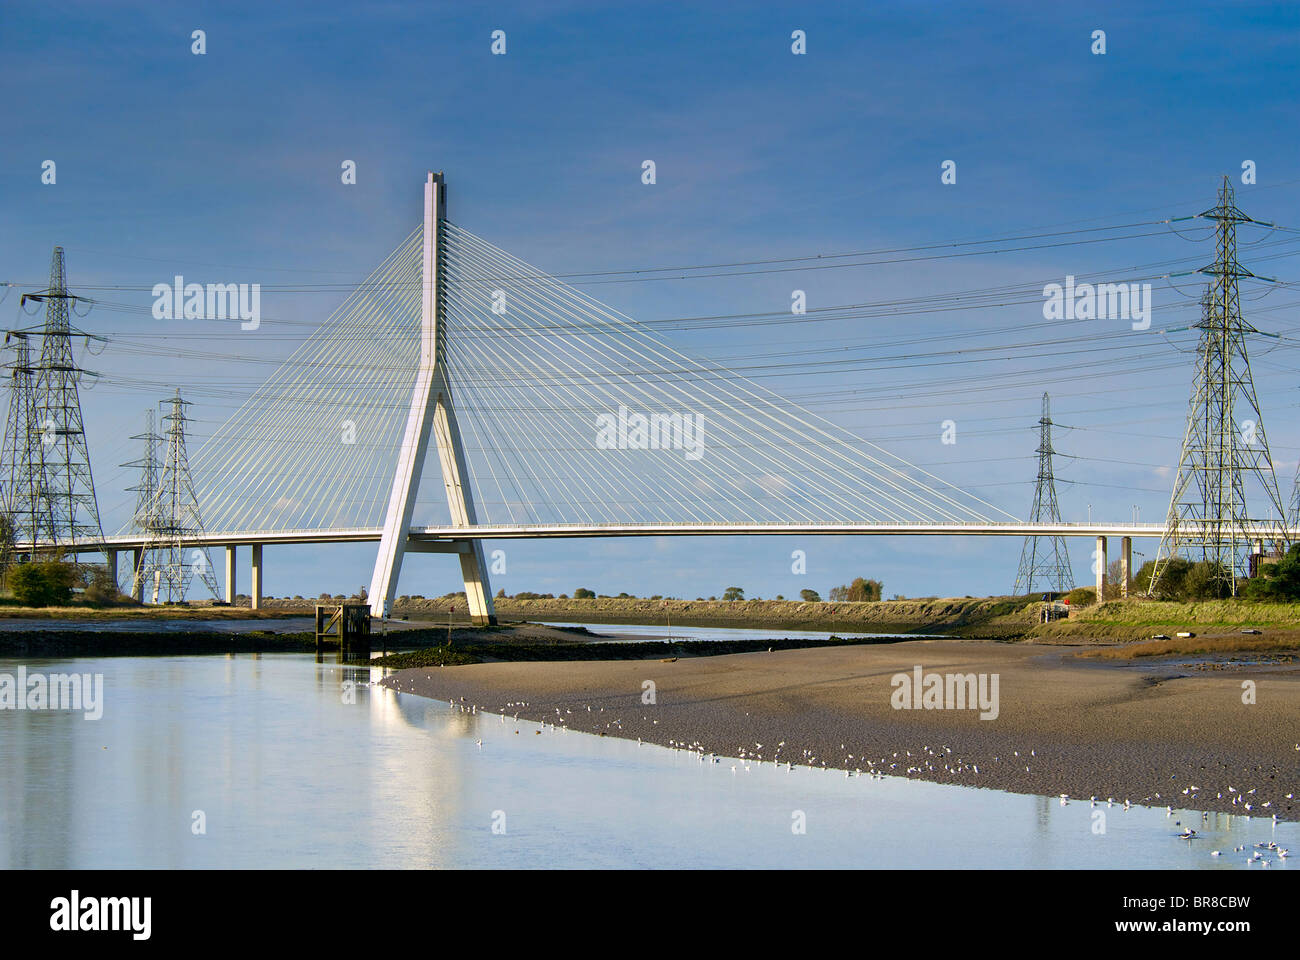 The new suspension bridge carrying the A548 road over the river Dee near Flint in North Wales. Stock Photo